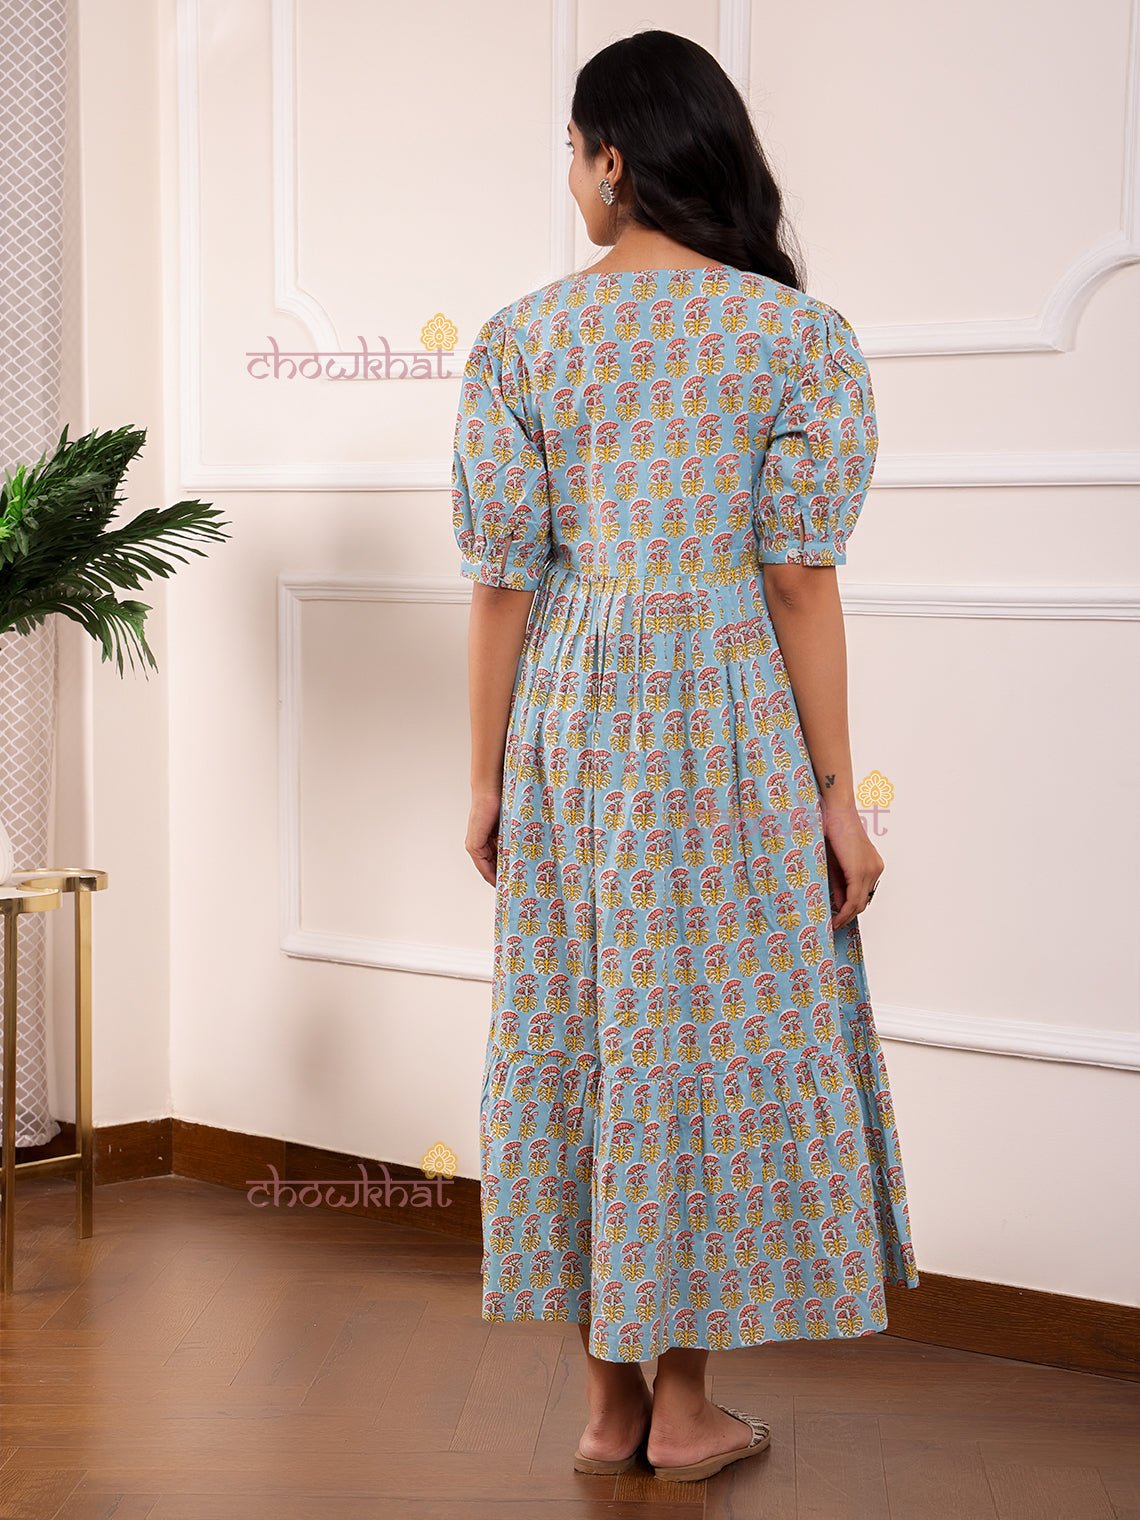 Leher Hand Printed Cotton Dress - Chowkhat Lifestyle